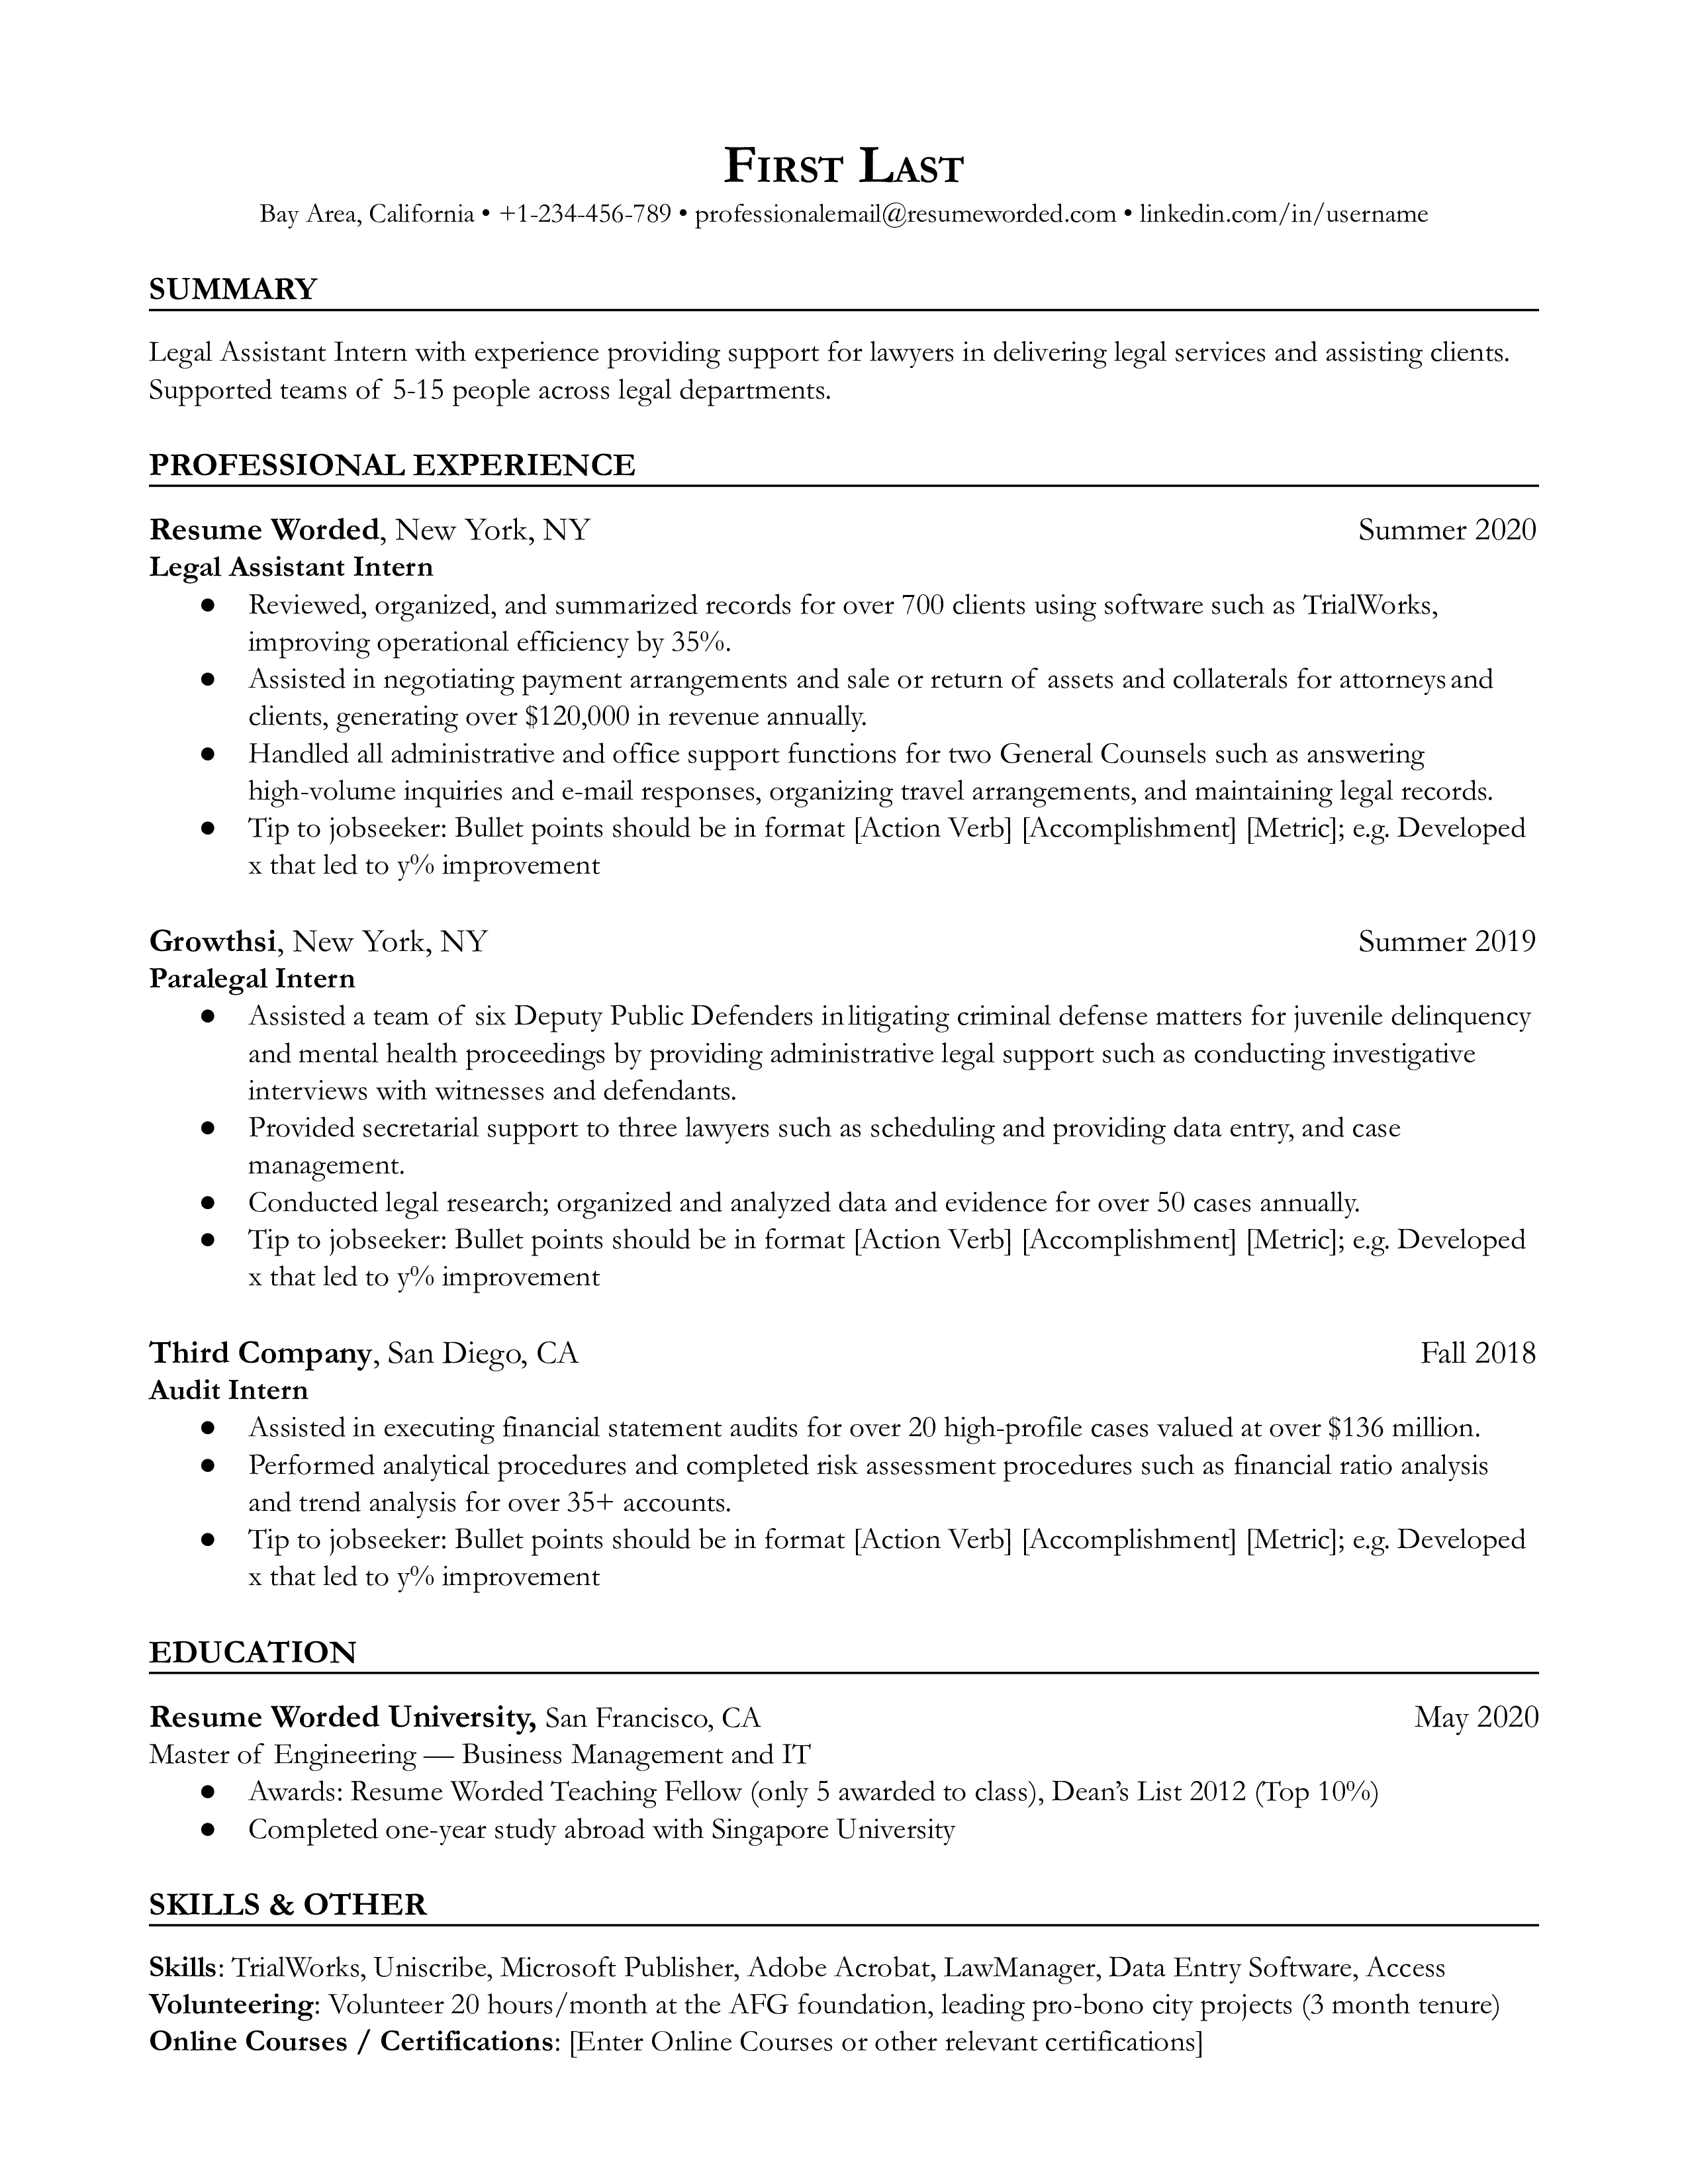 An organised, detailed-oriented CV for entry-level legal assistant role.